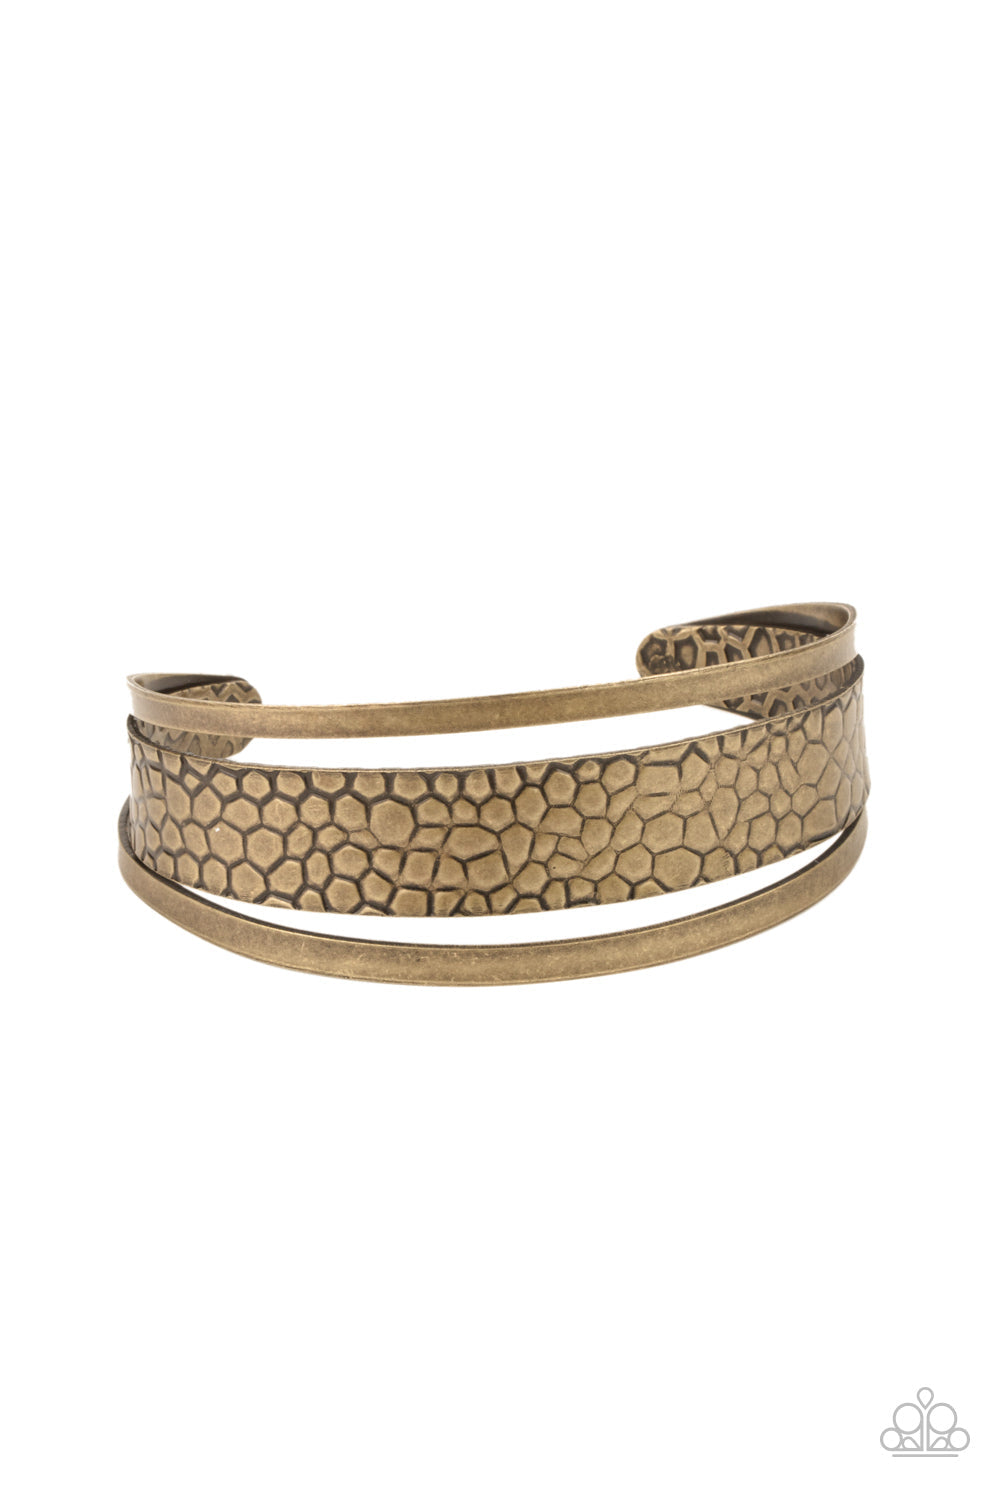 Jungle Jingle - Brass Cuff Bracelet - Paparazzi Accessories - Embossed in metallic crocodile-like print, an antiqued brass cuff attaches to the center of an airy brass cuff for a wildly stacked look. Sold as one individual bracelet.